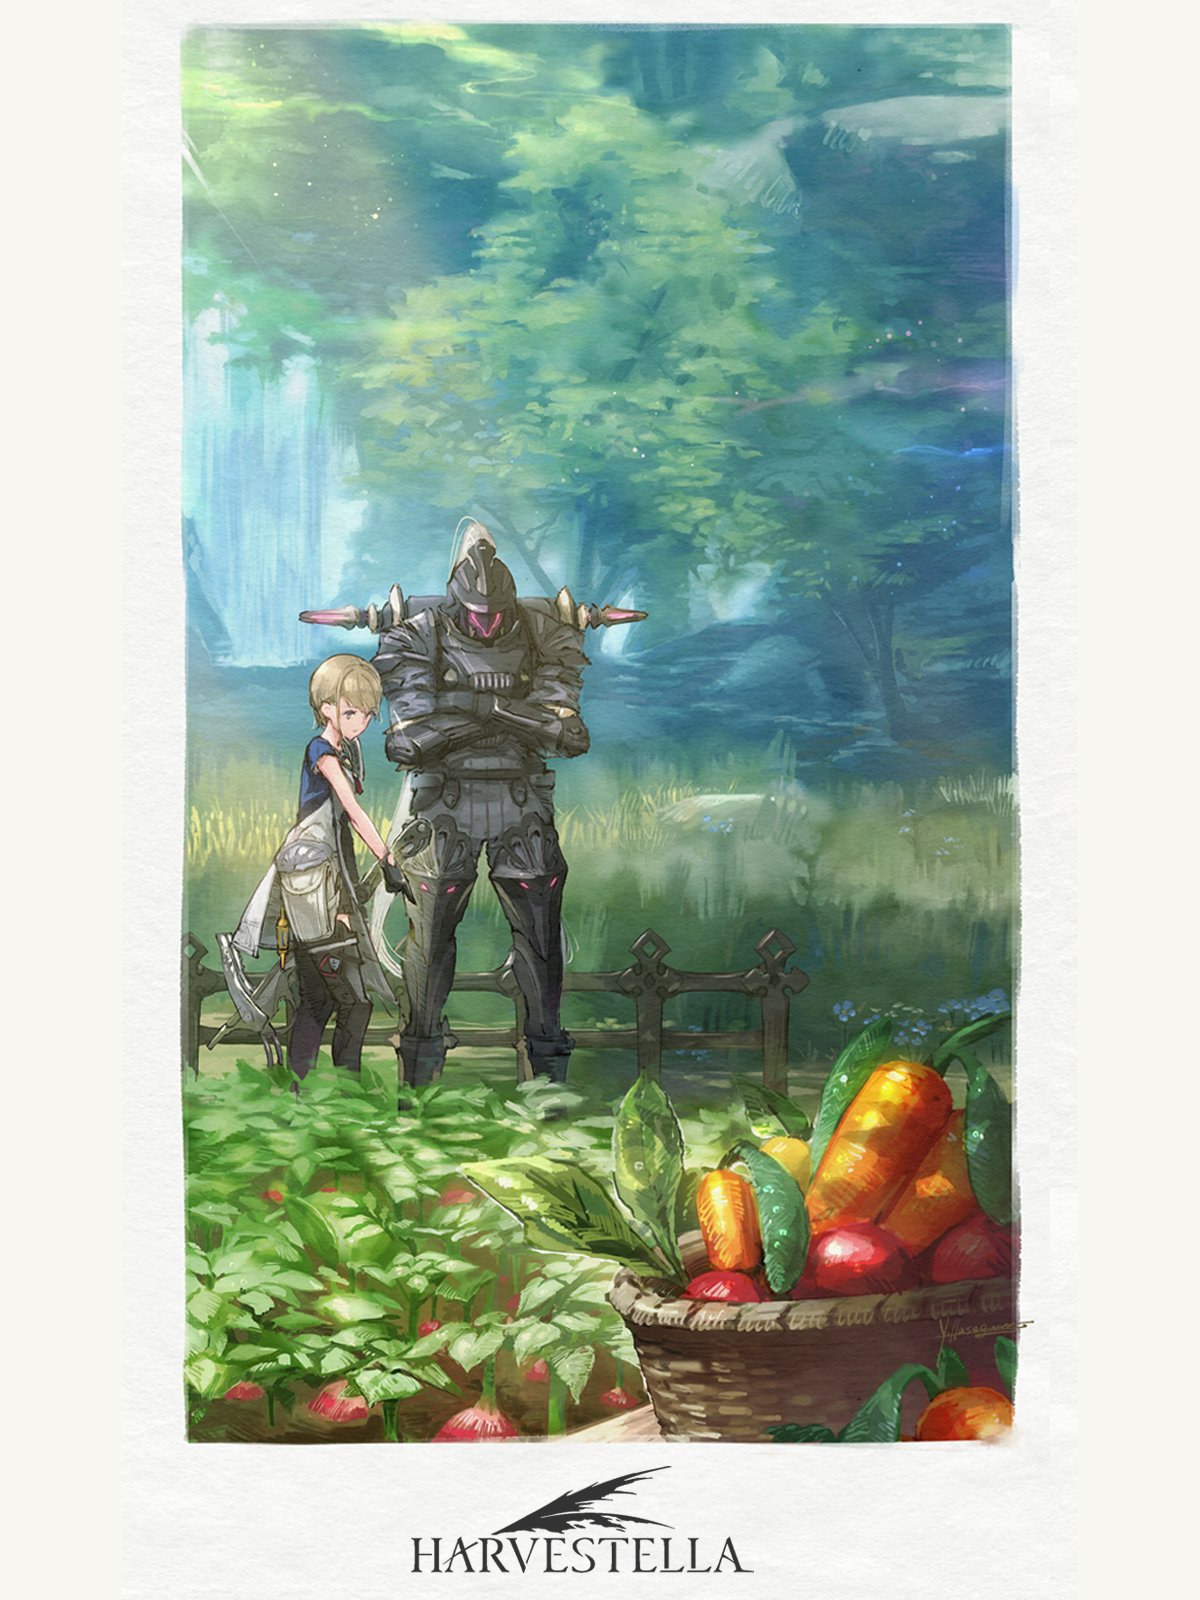 The Protagonist,
     a Human with blond hair, blue eyes, white skin and a fantasy white and blue outfit, is standing next to Dianthus, an Omen. 
     An Omen looks like a tall, black robot,  with a humanoid shape and purple highlit. The two of them are facing a field of the 
     game's fantasy vegetables, which kind of looks like carrots and radishes. The Protagonist is pointing at the field, while Dianthus
     listens deeply, with her arms crossed against her chest.